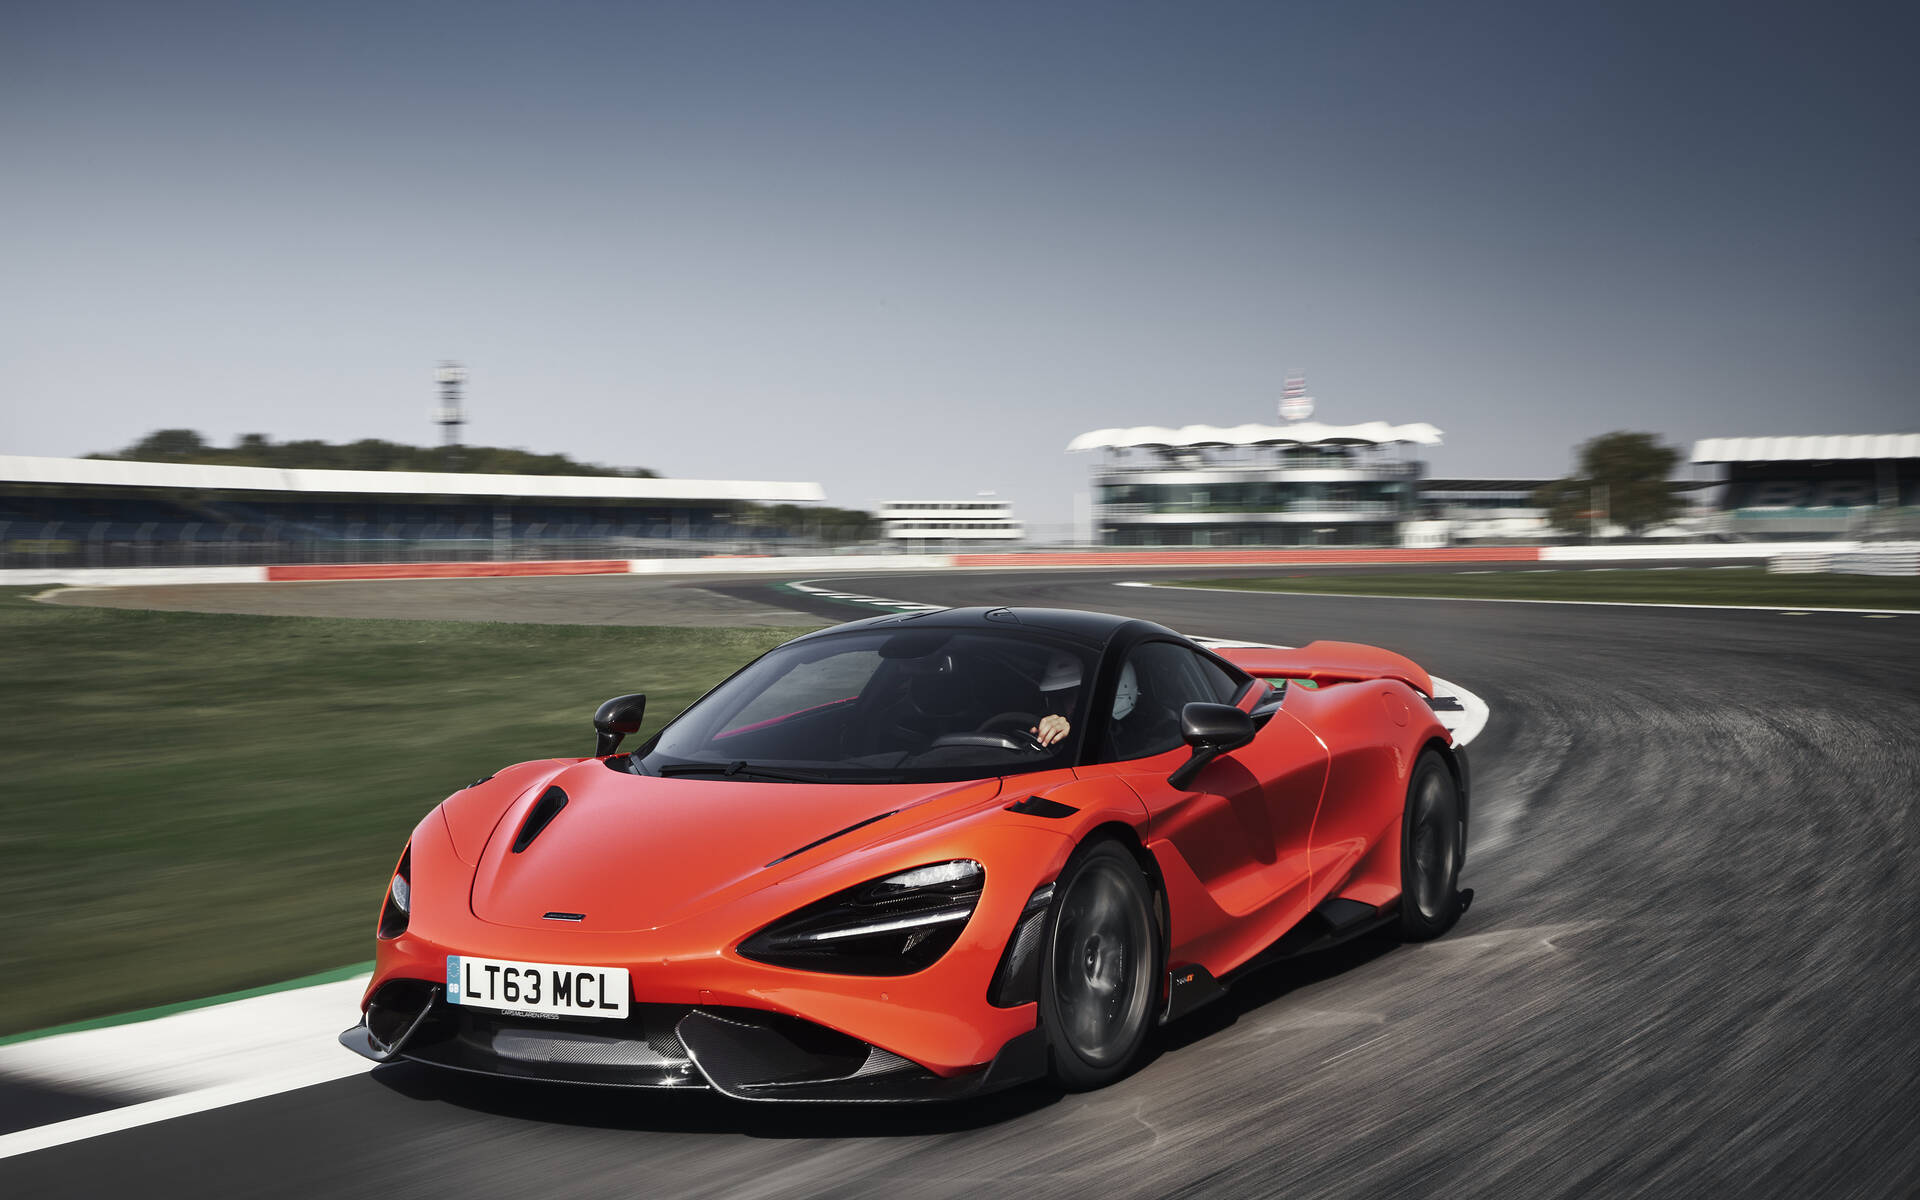 2022 Mclaren 765 Lt Coupe Price And Specifications The Car Guide